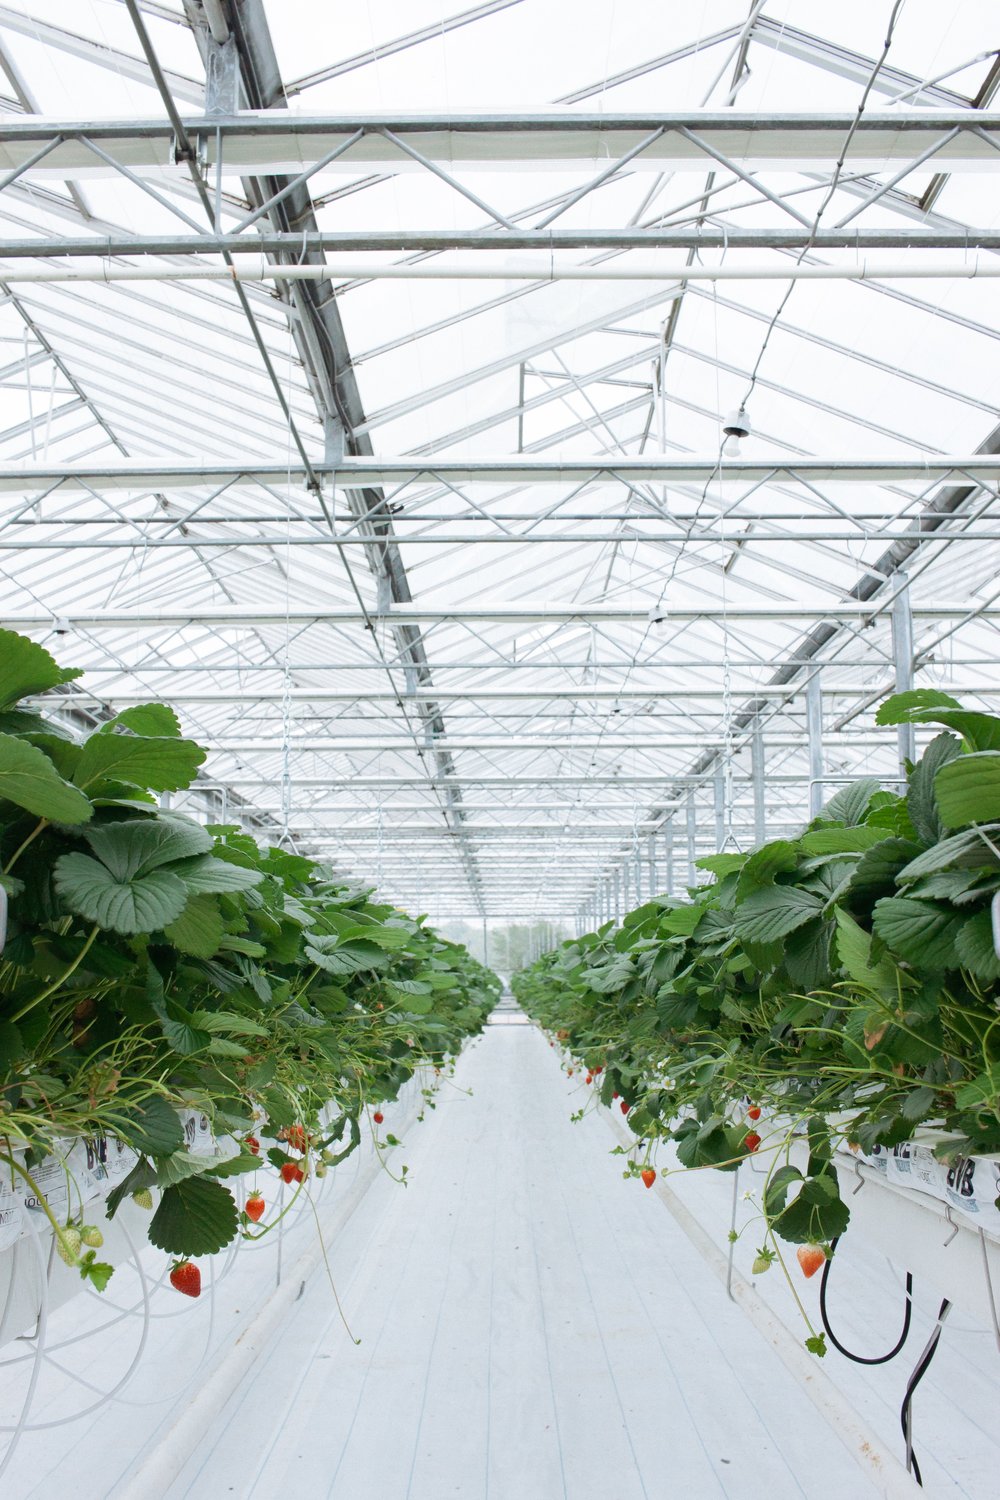 Soilless greenhouse production has started to be preferred in strawberry production due to the chemicals used to solve soil-borne diseases in the cultivation area, deteriorating the structure of the soil and the production volume lost in this process.